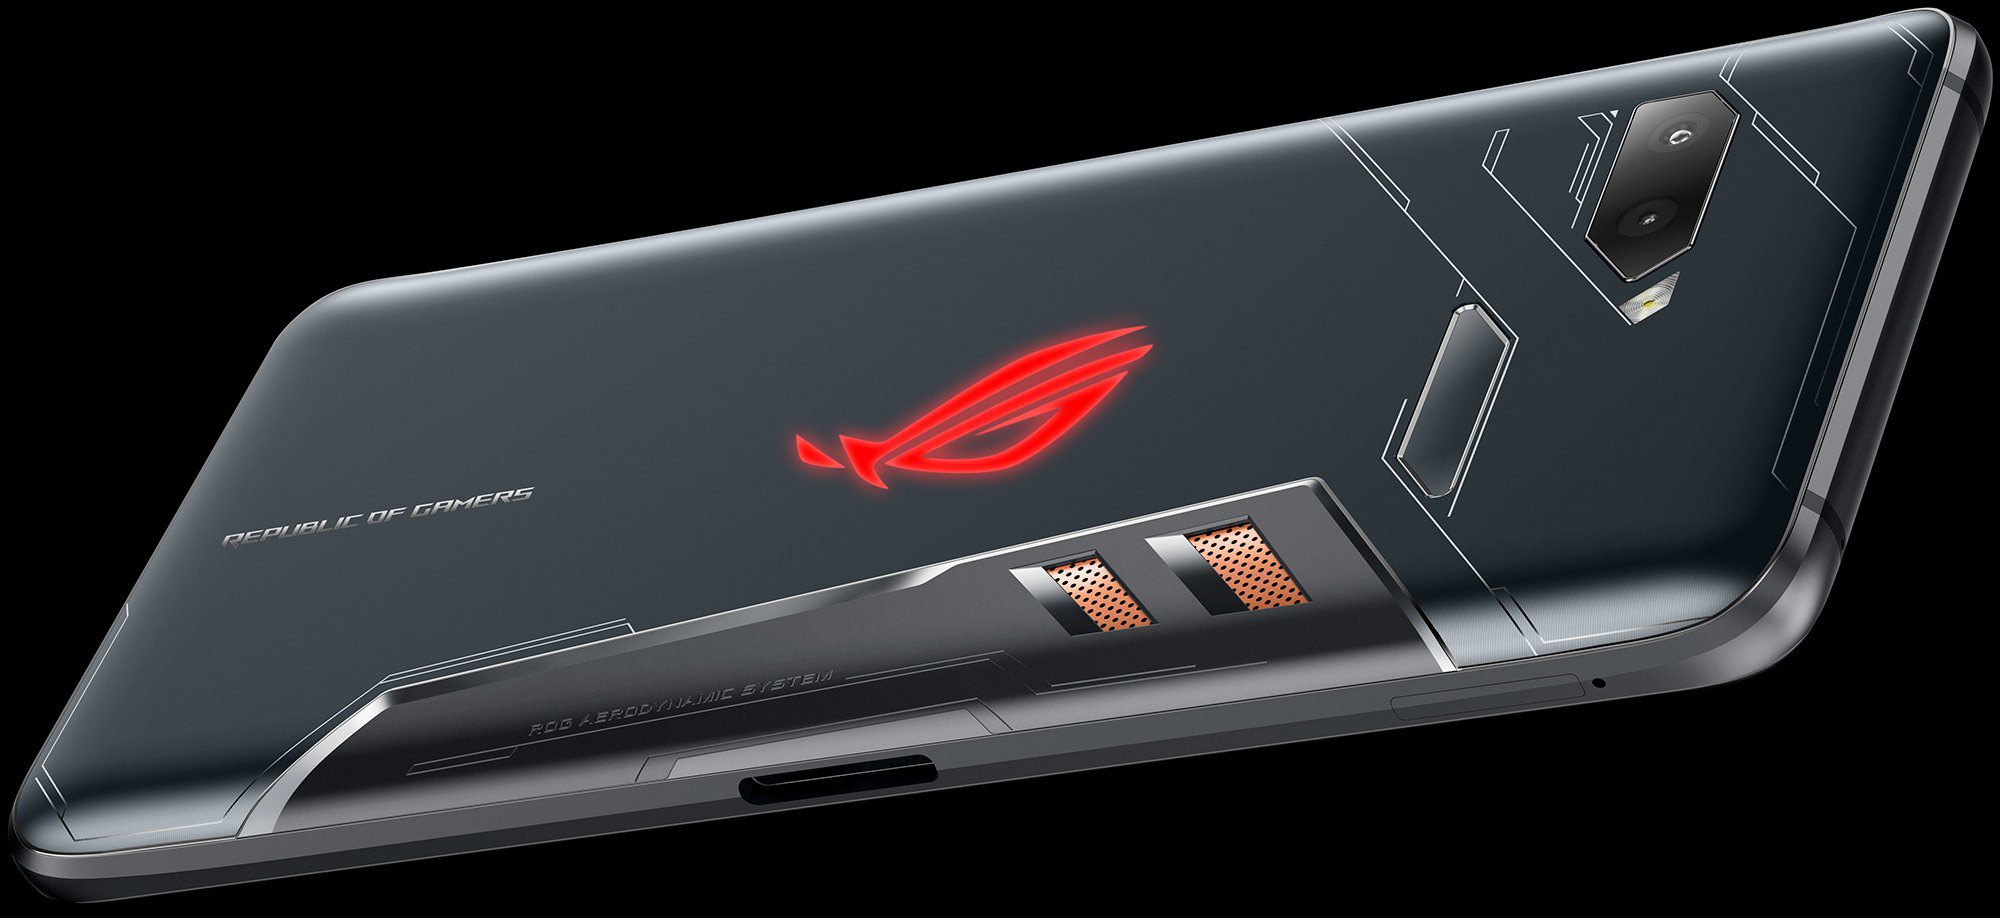 Asus Goes for Mobile Market with Gaming Phone